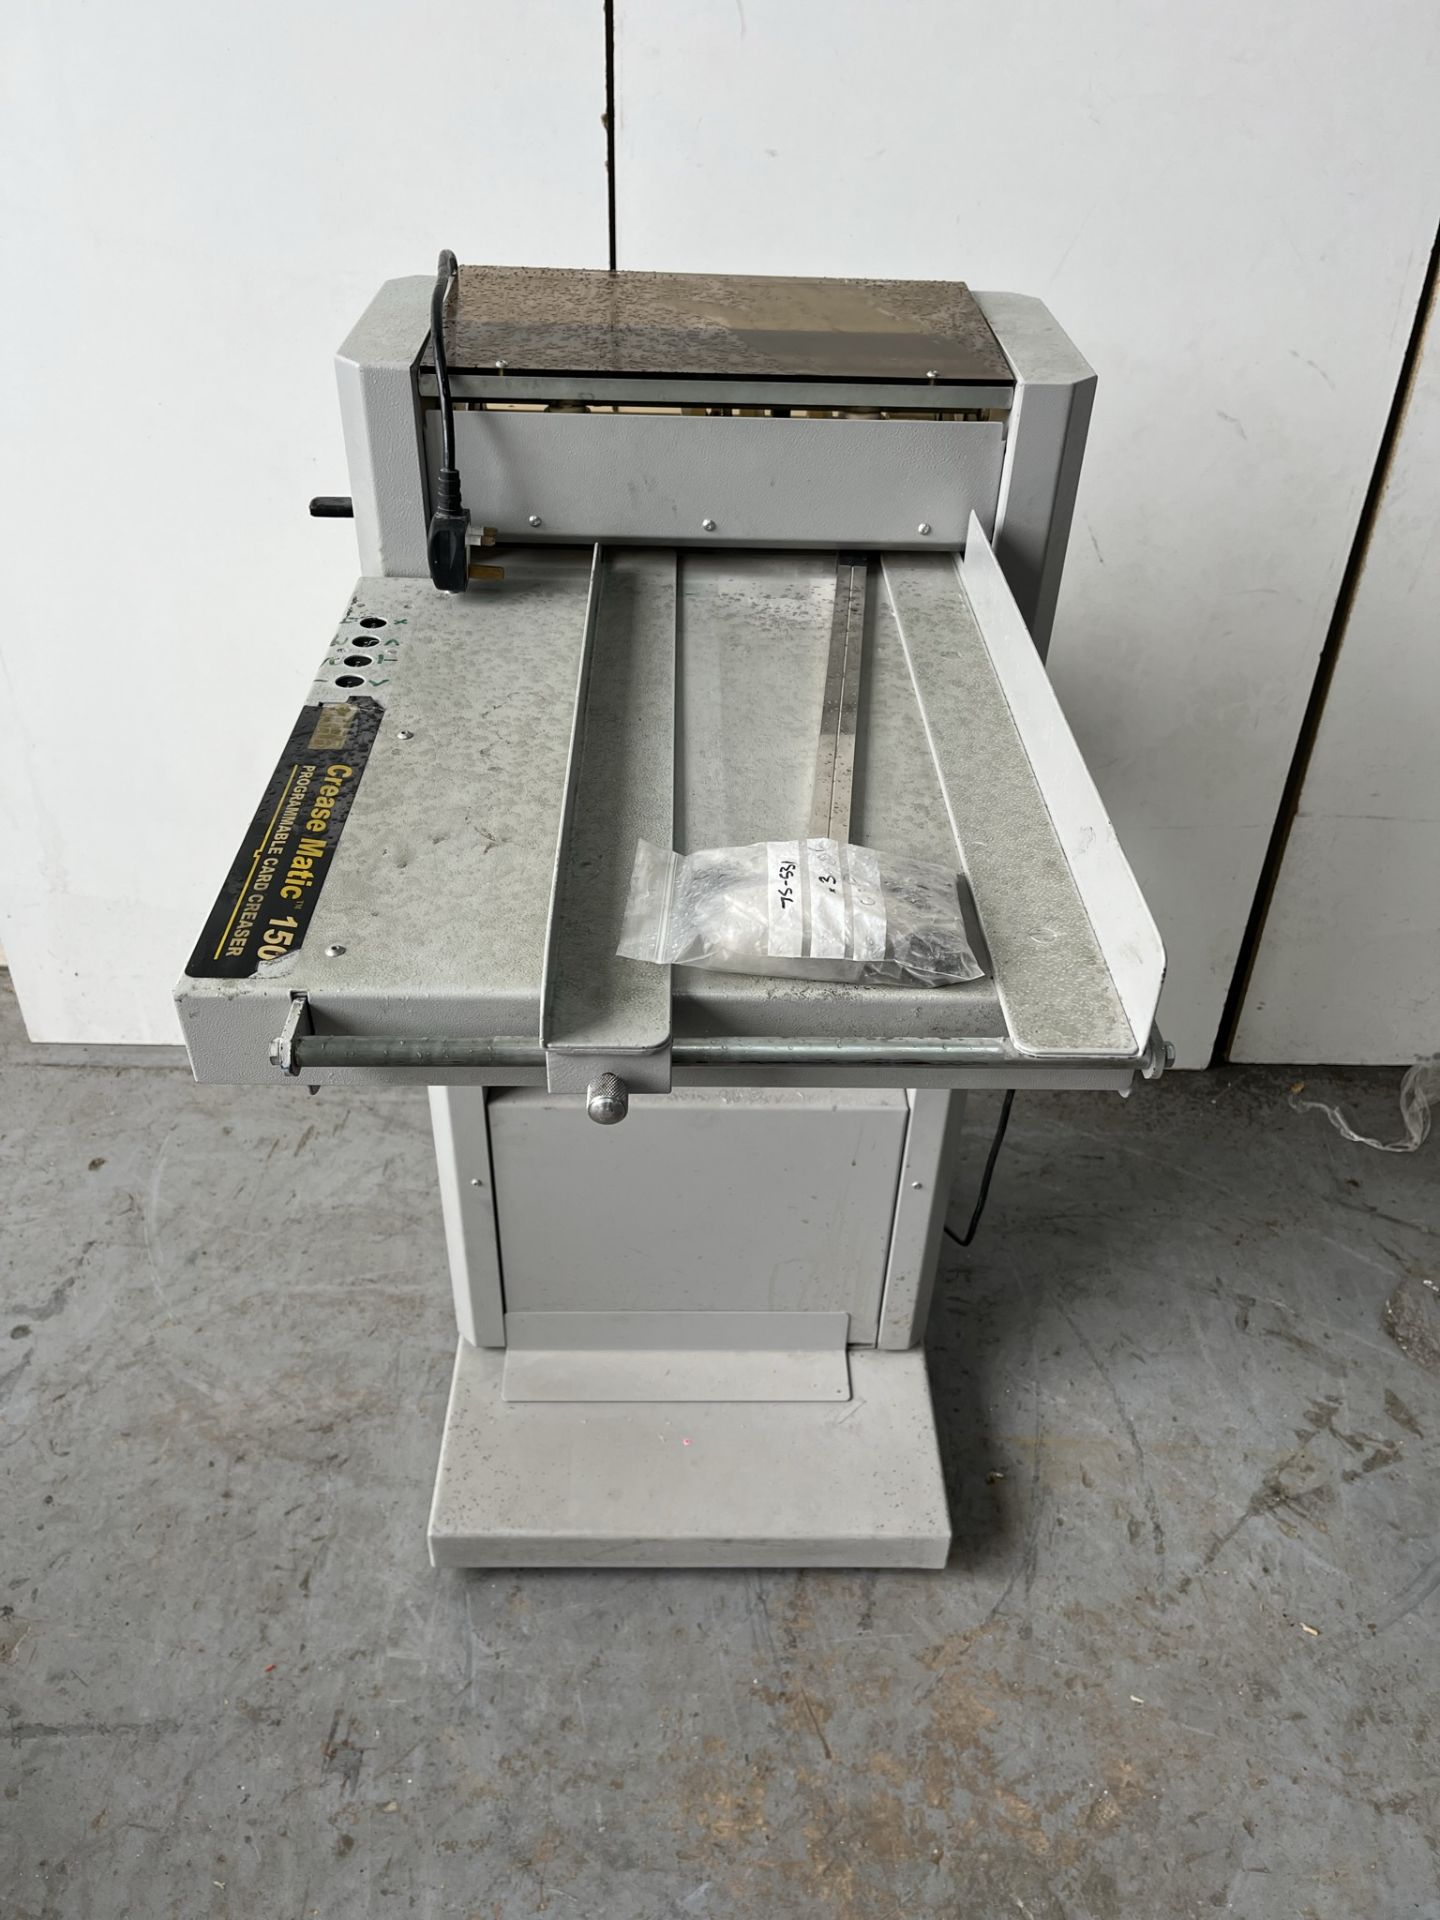 K.A.S CreaseMatic CM 150/P Programmable Creasing Machine - Image 2 of 4